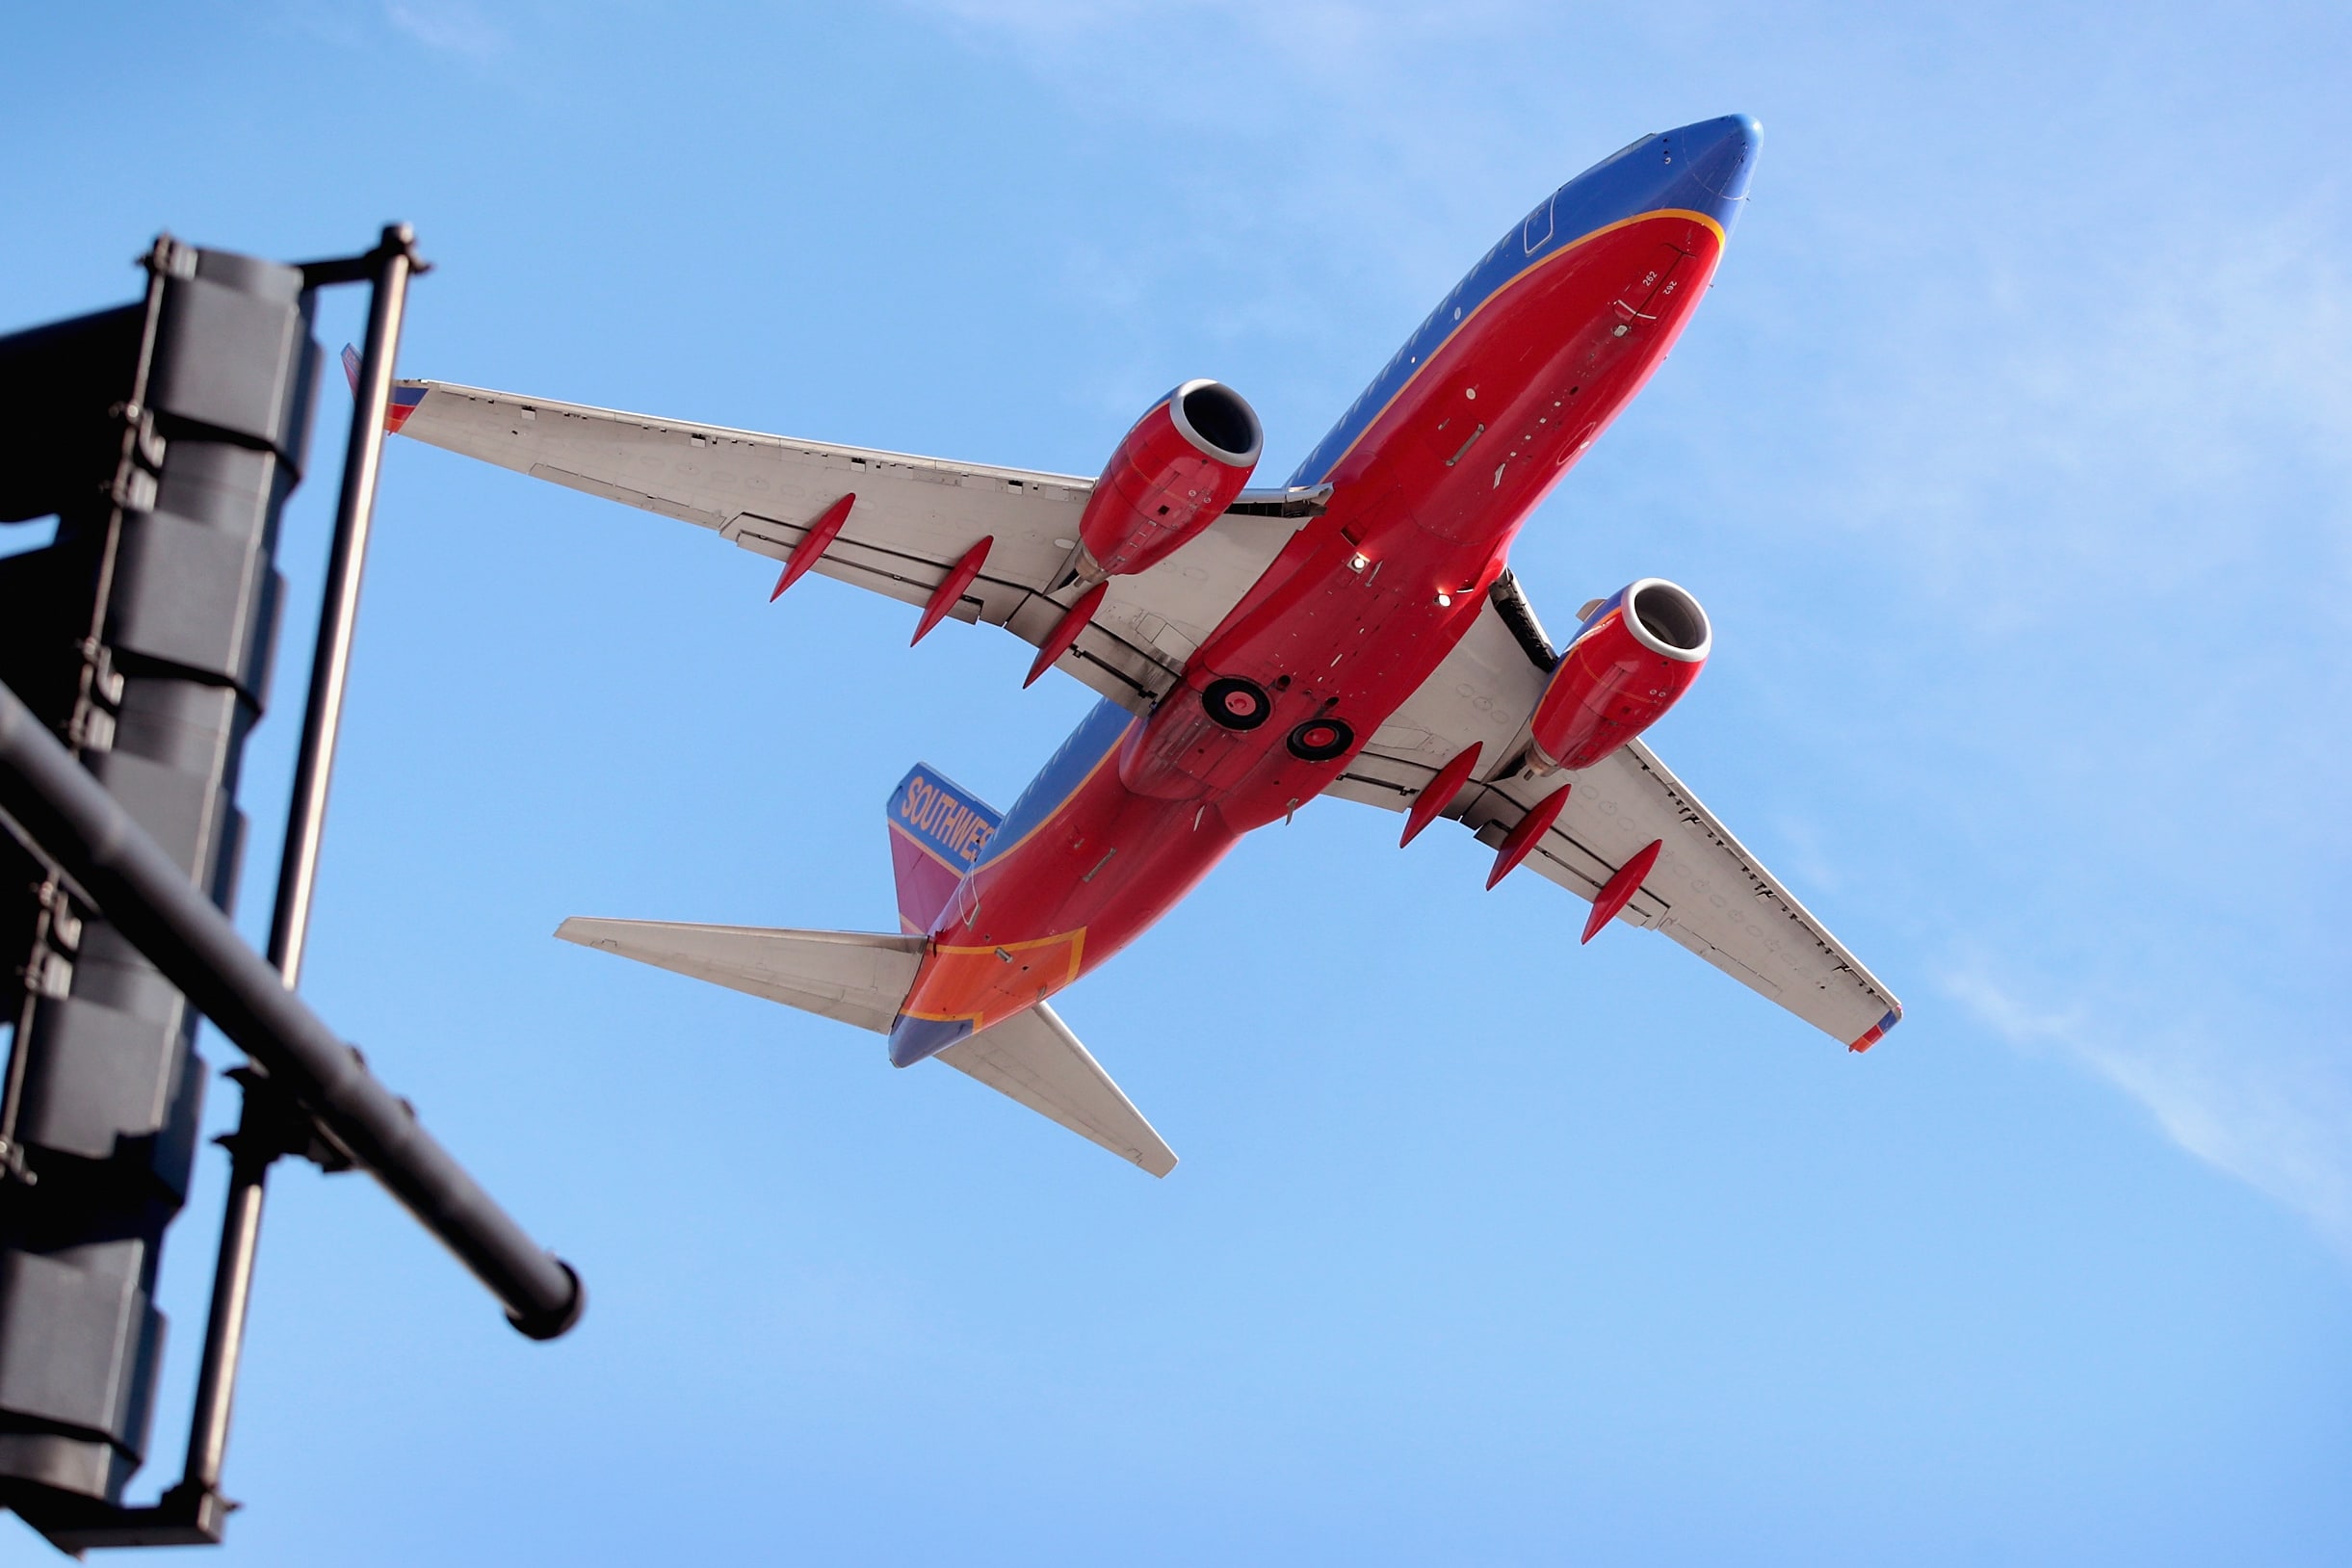 Southwest Airlines is recording the biggest loss as the Corona virus reduces demand